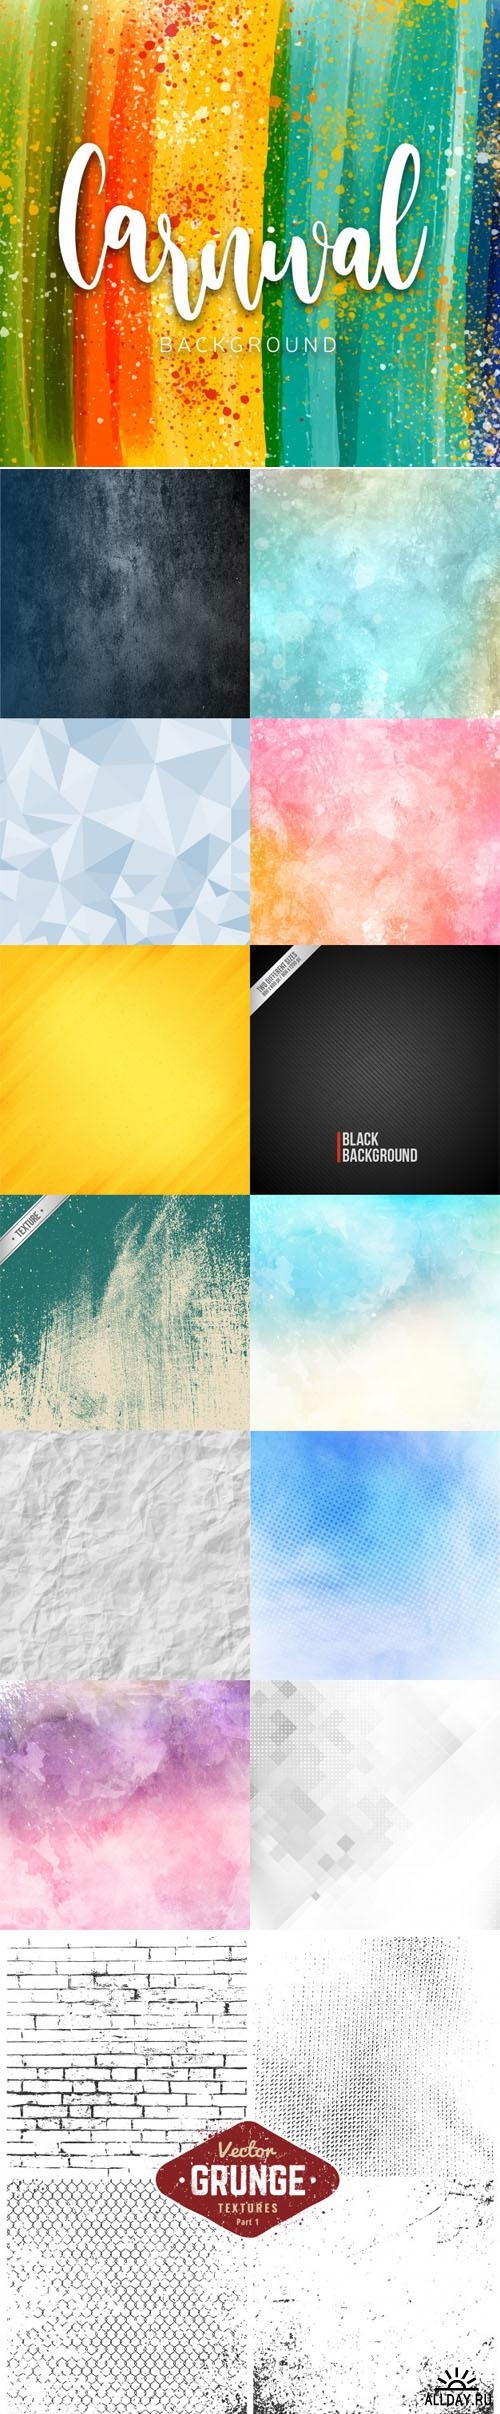 14 Textures Backgrounds Vector ((eps ((ai - 2 (7 files)